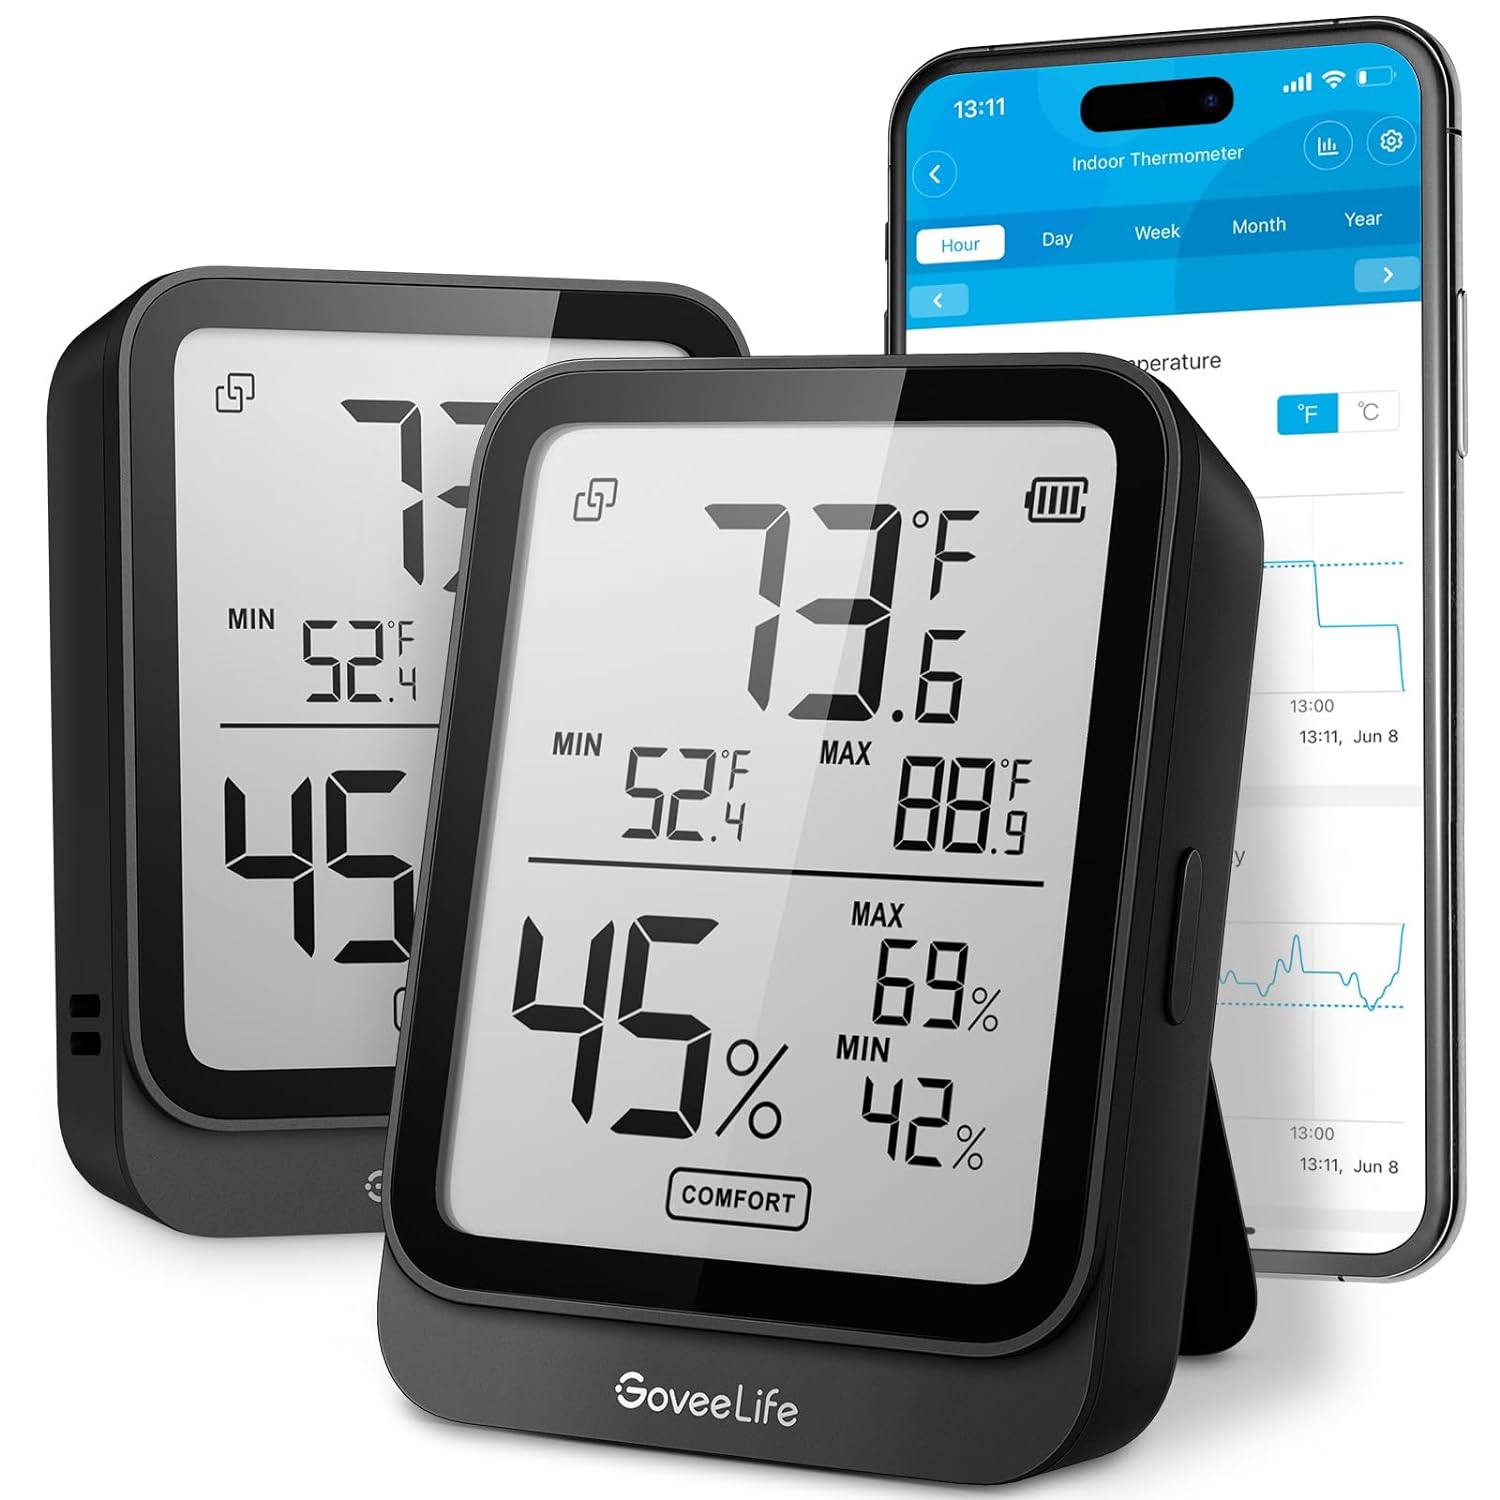  Bundle-4 Items: Govee Hygrometer Thermometer 4 Pack, Humidity  Temperature Gauge with App Alert, Mini Bluetooth Digital Thermometer  Humidity Sensor with Data Storage : Appliances